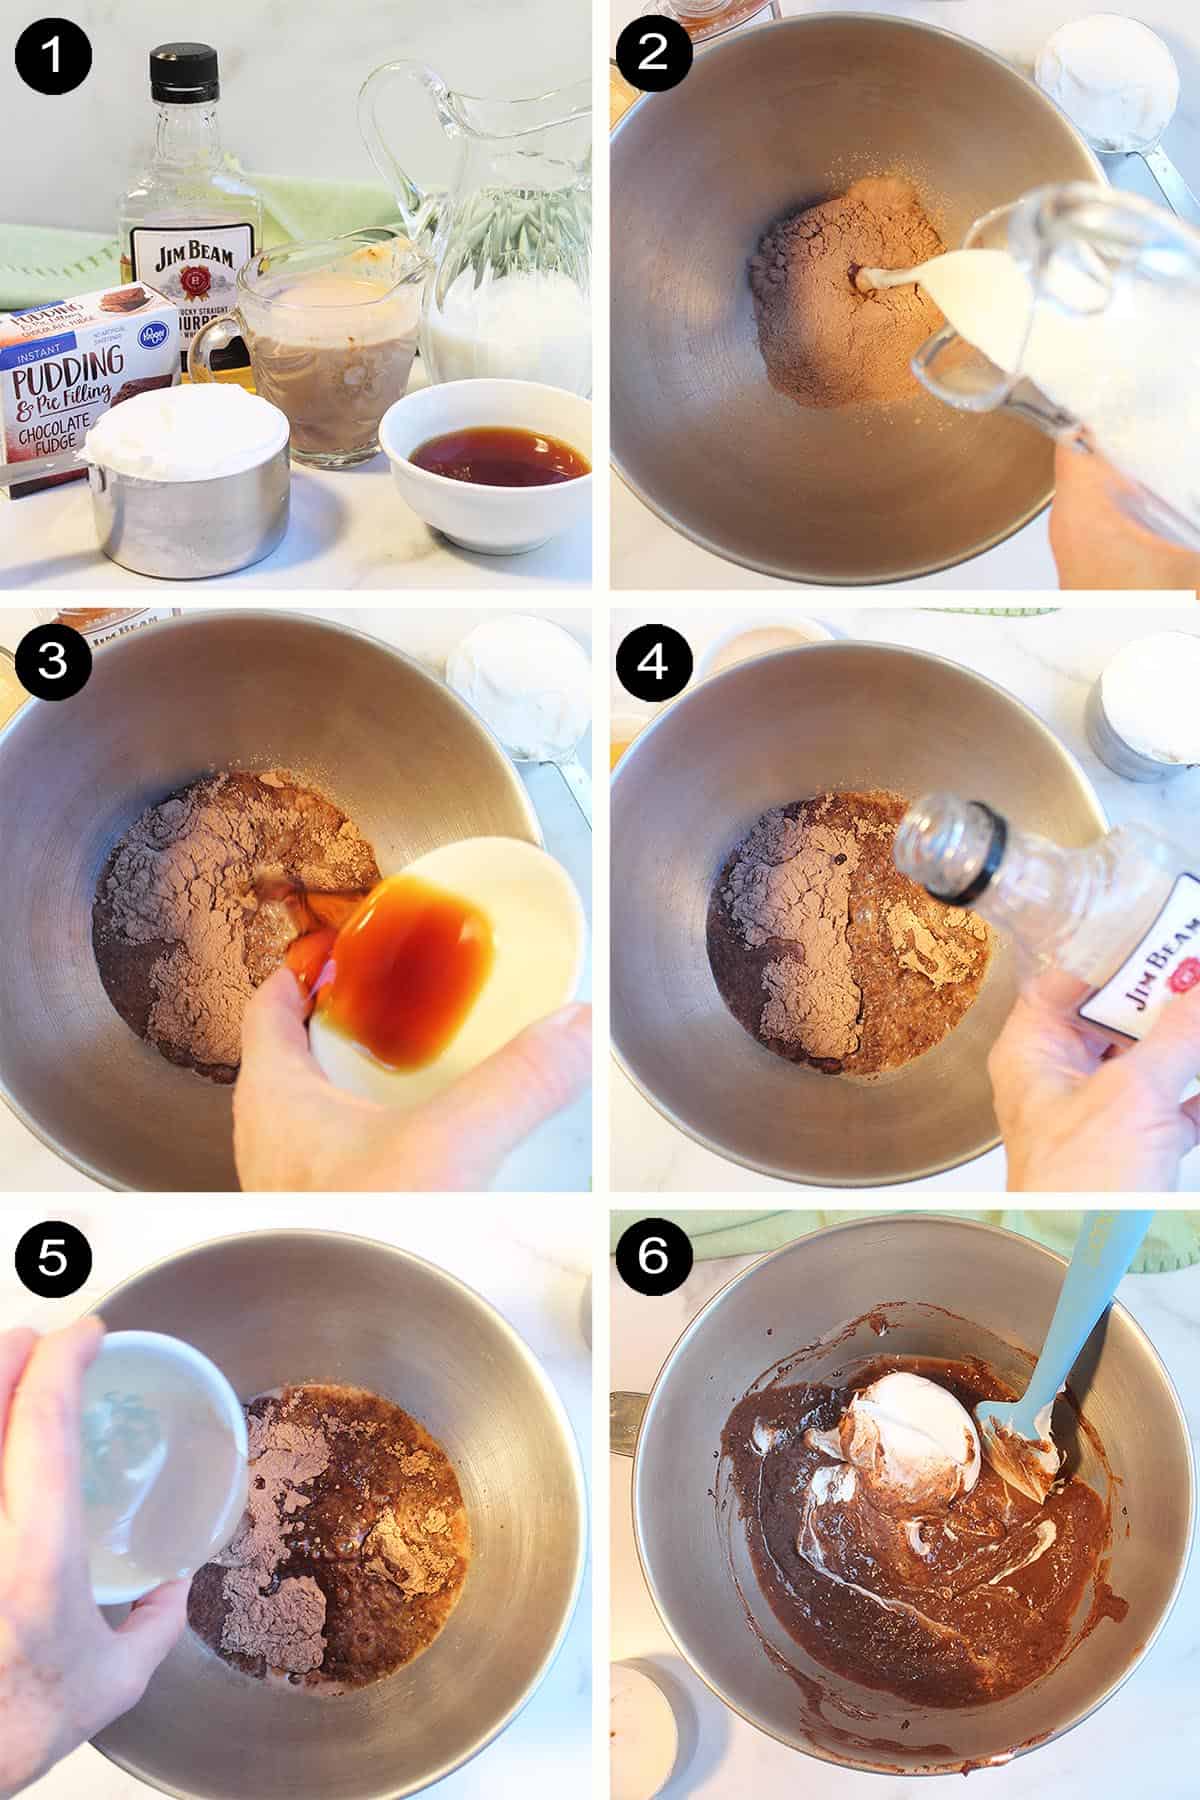 6 steps to make chocolate mousse.